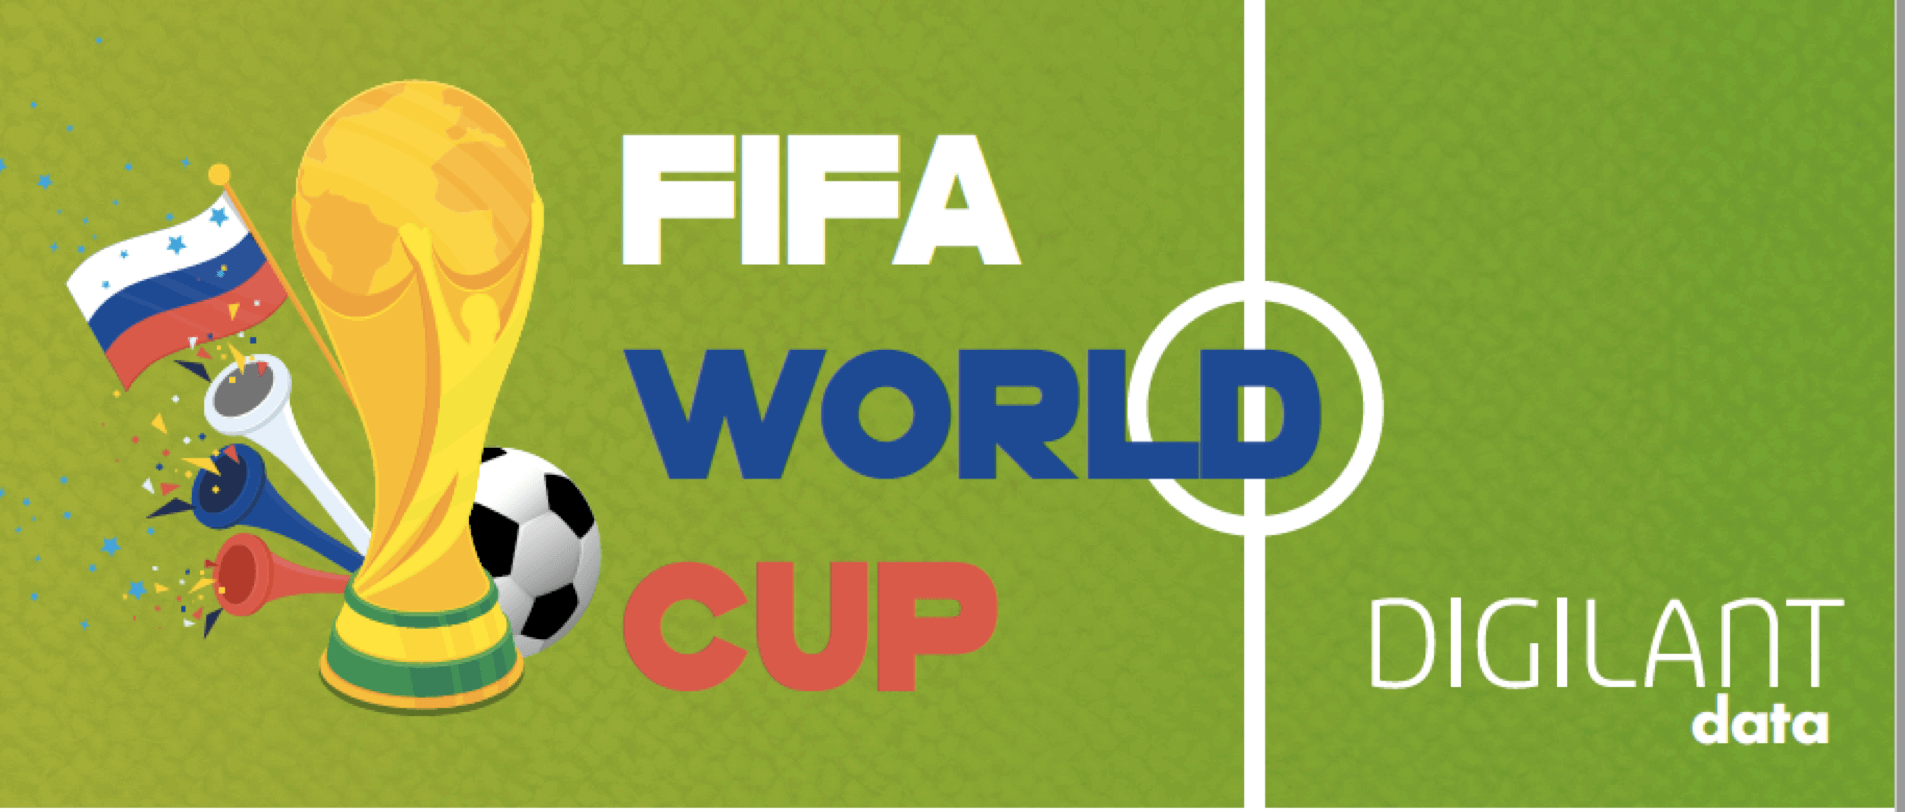 FIFA World Cup 2018 Infographic Part 3: Content